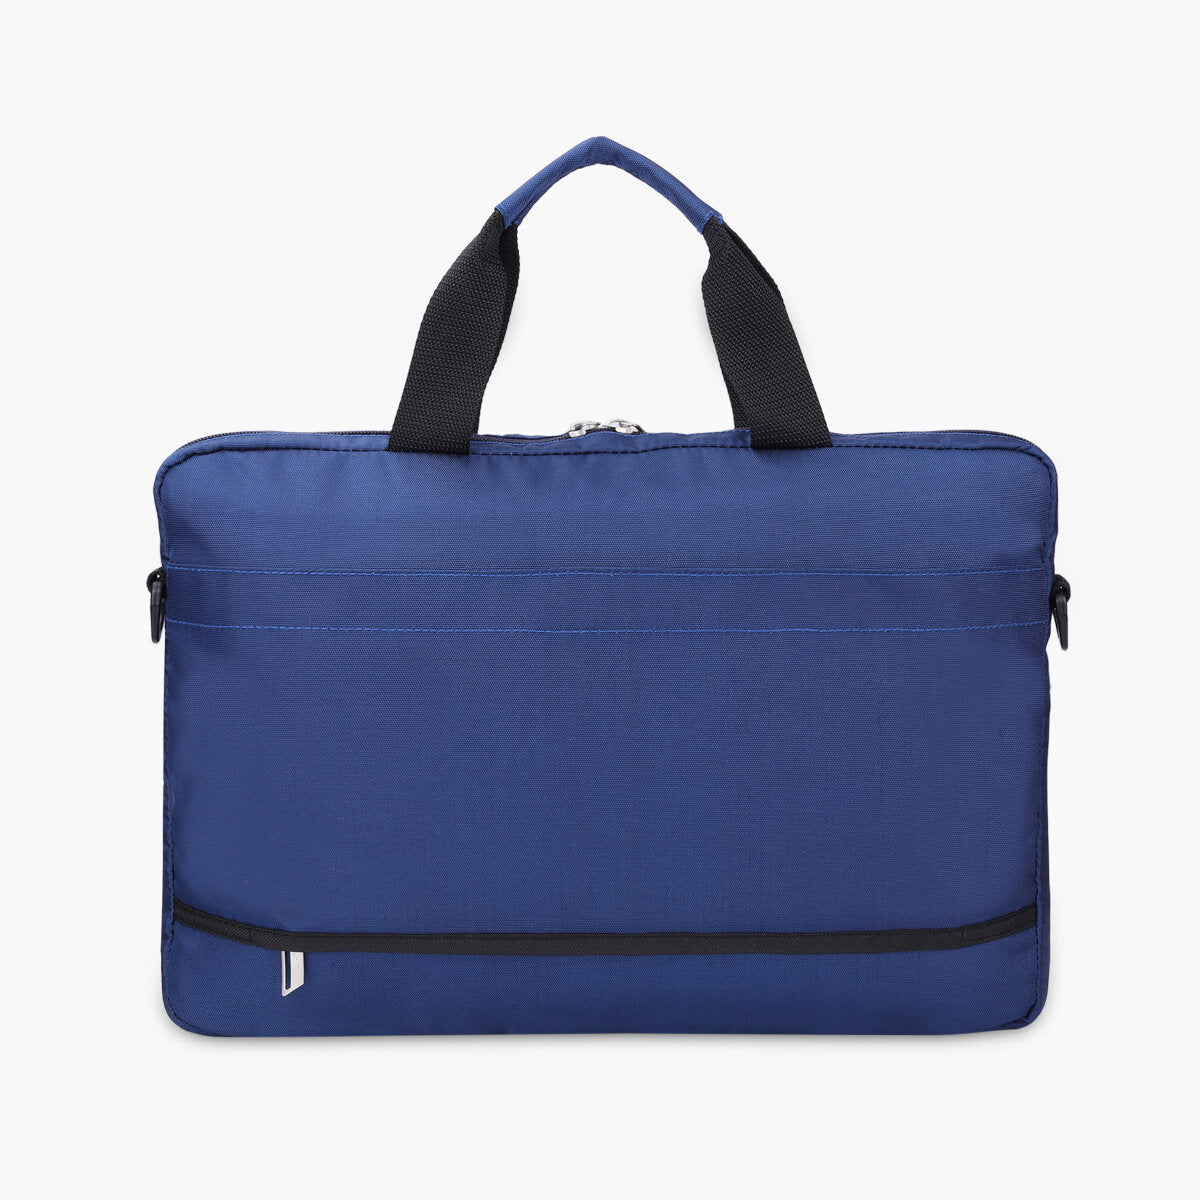 Navy | Protecta Staunch Ally Lite Slim Office Laptop Bag-5